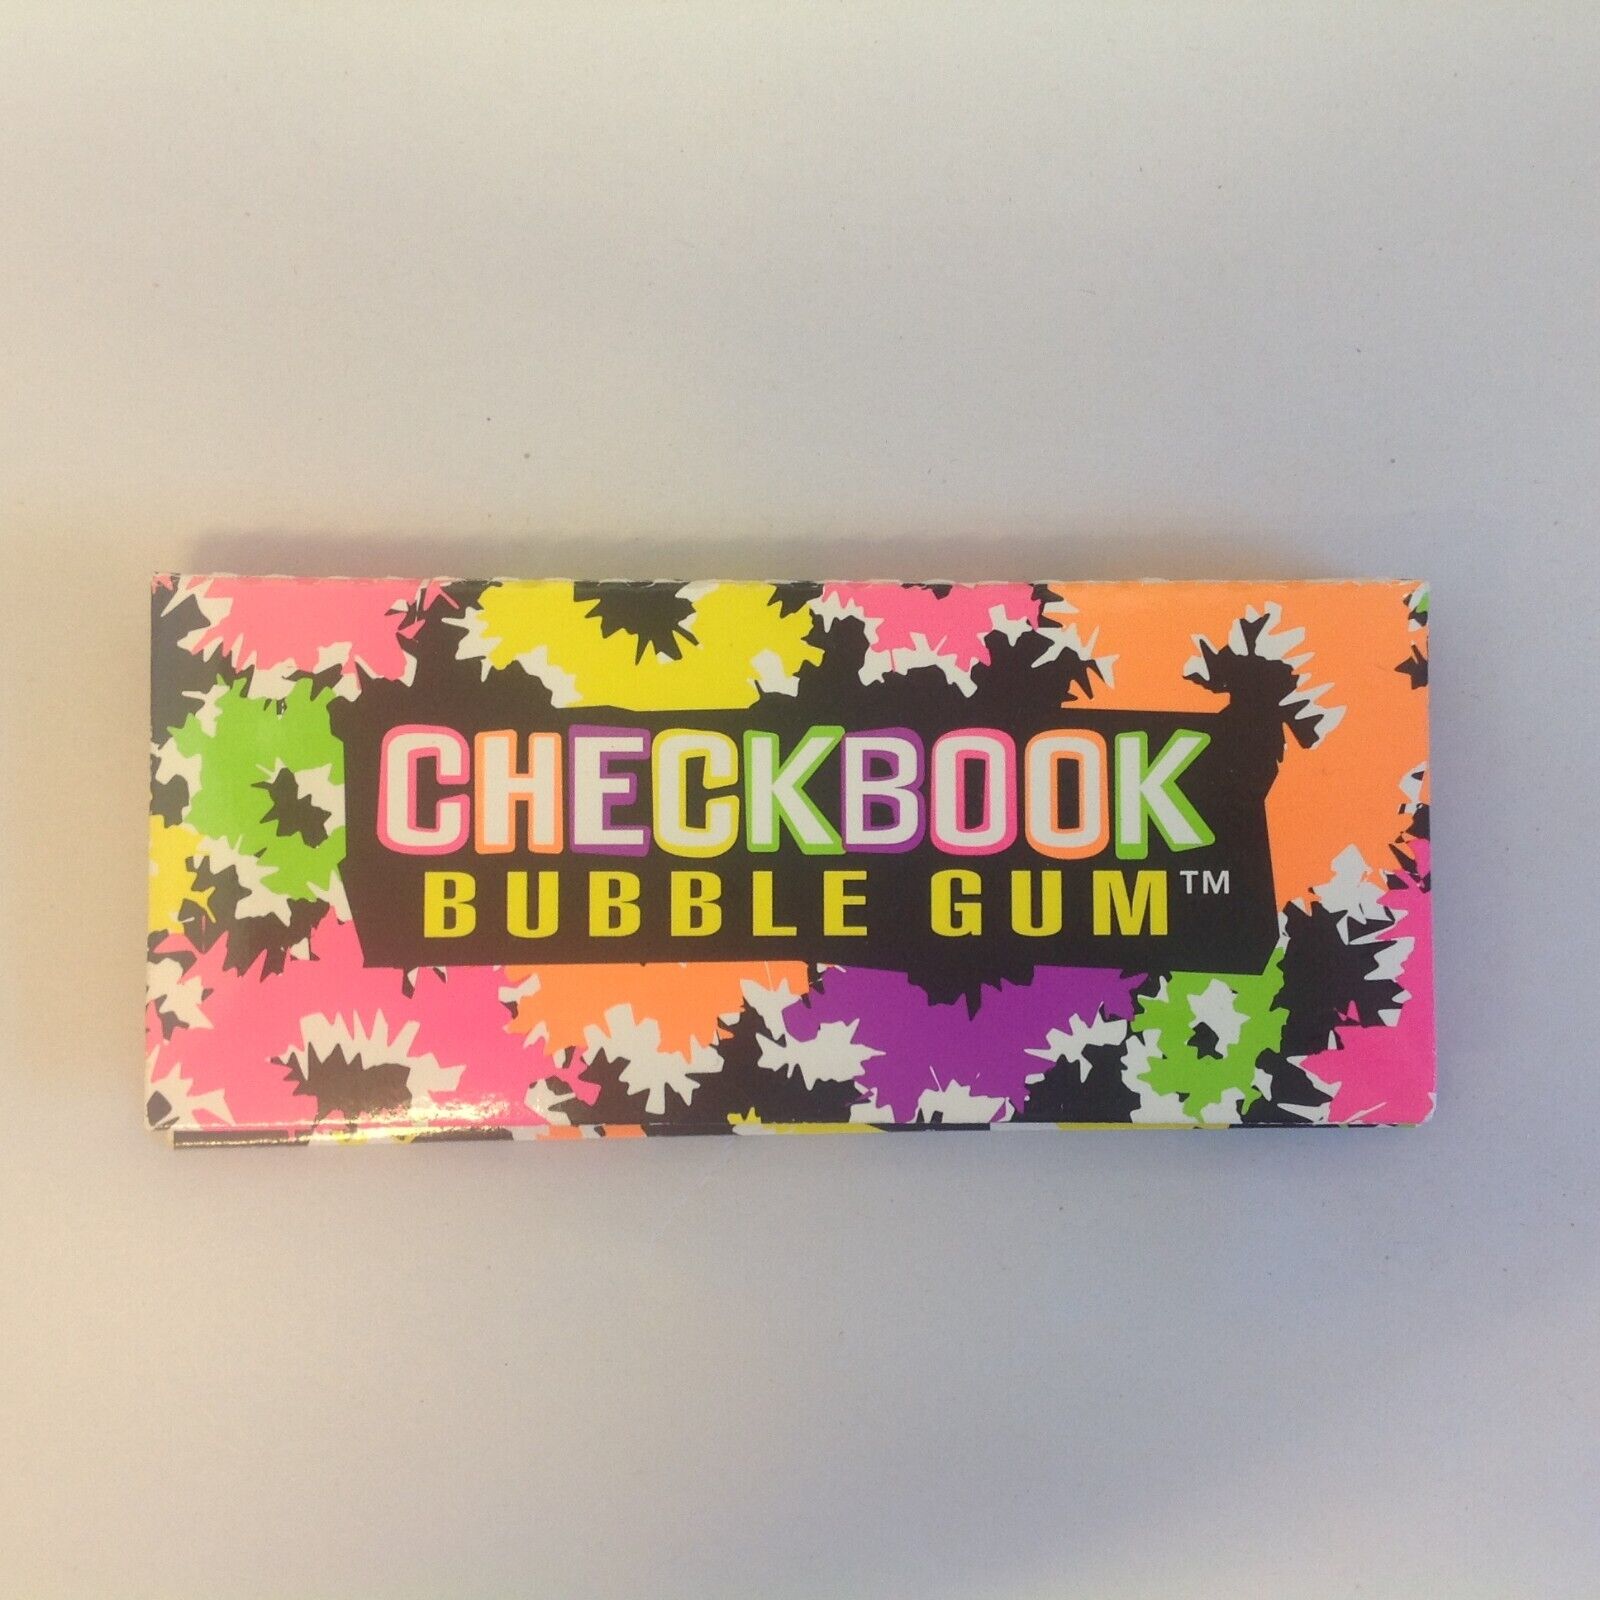 Vintage 1994 Unopened Amurol Confections Checkbook Bubble Gum Candy Container